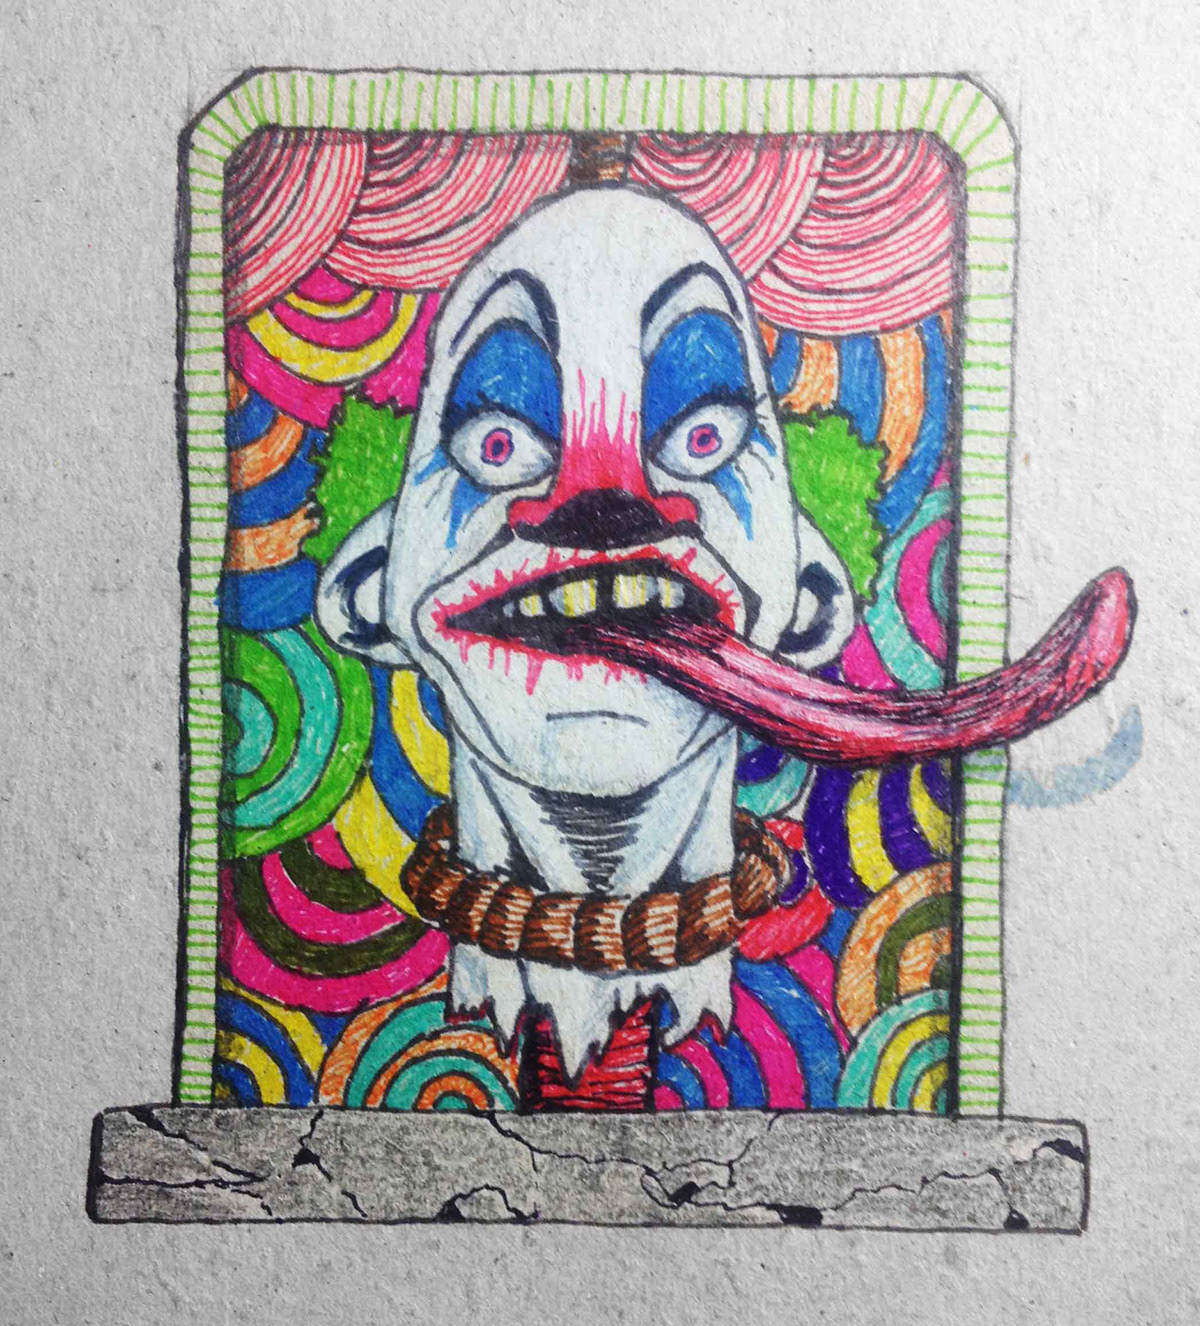 poster posters faces clown freak bull ram king dead eyes toung characters ink colorful